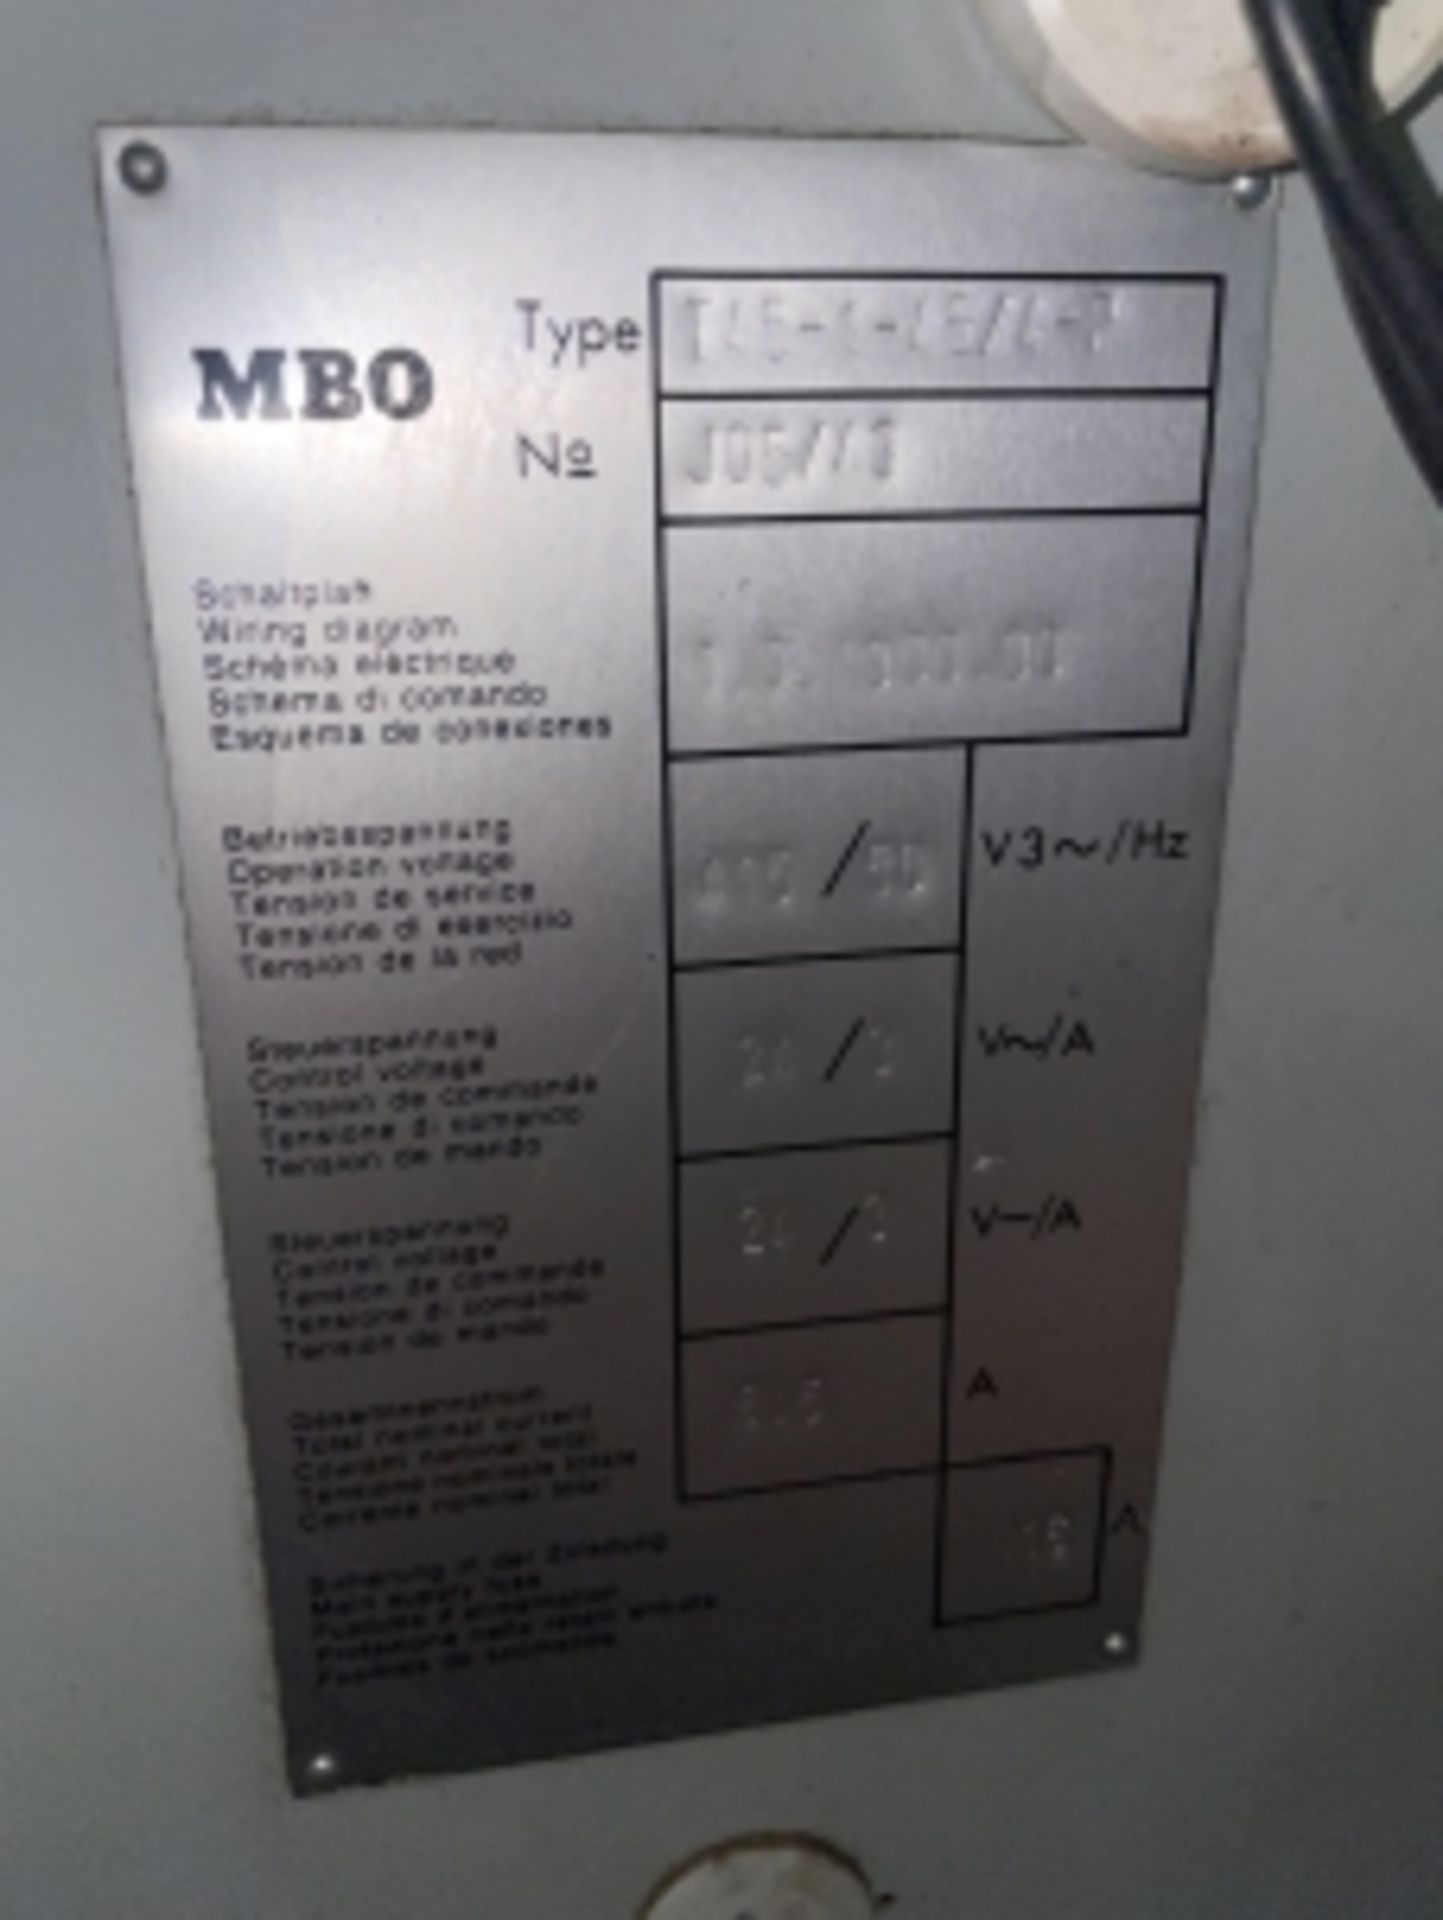 MBO T45-1-45/4 Pharma Folder, serial number S-5803-134, year of manufacture 1990, with T45-P suction - Image 7 of 7